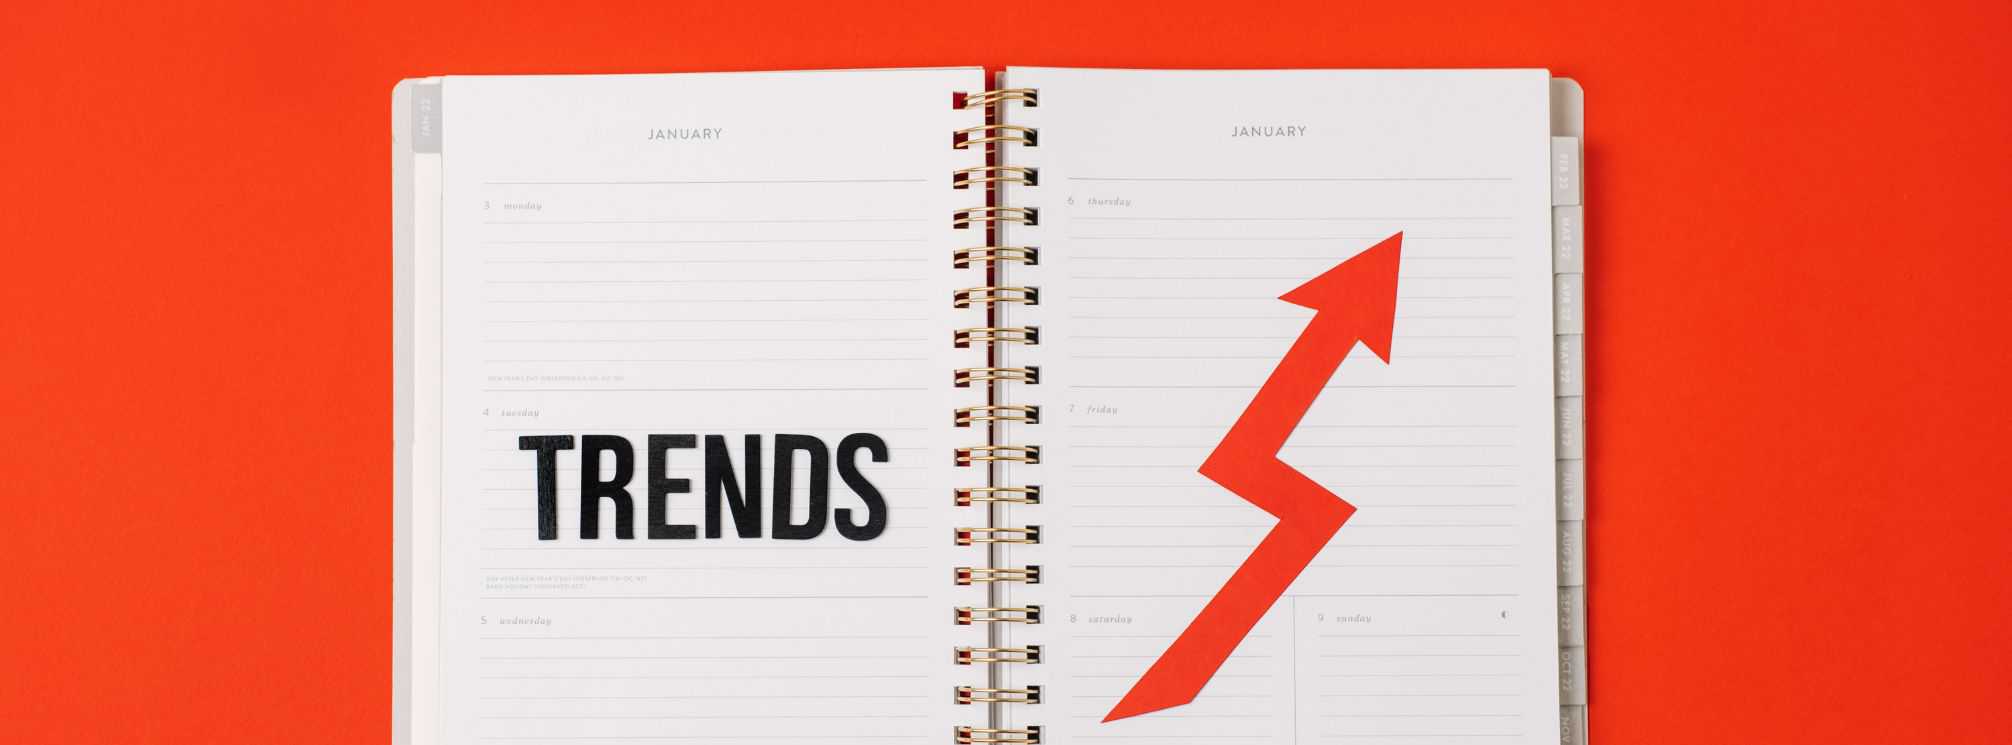 Red background with a notebook on it that says trends with an arrow pointing up